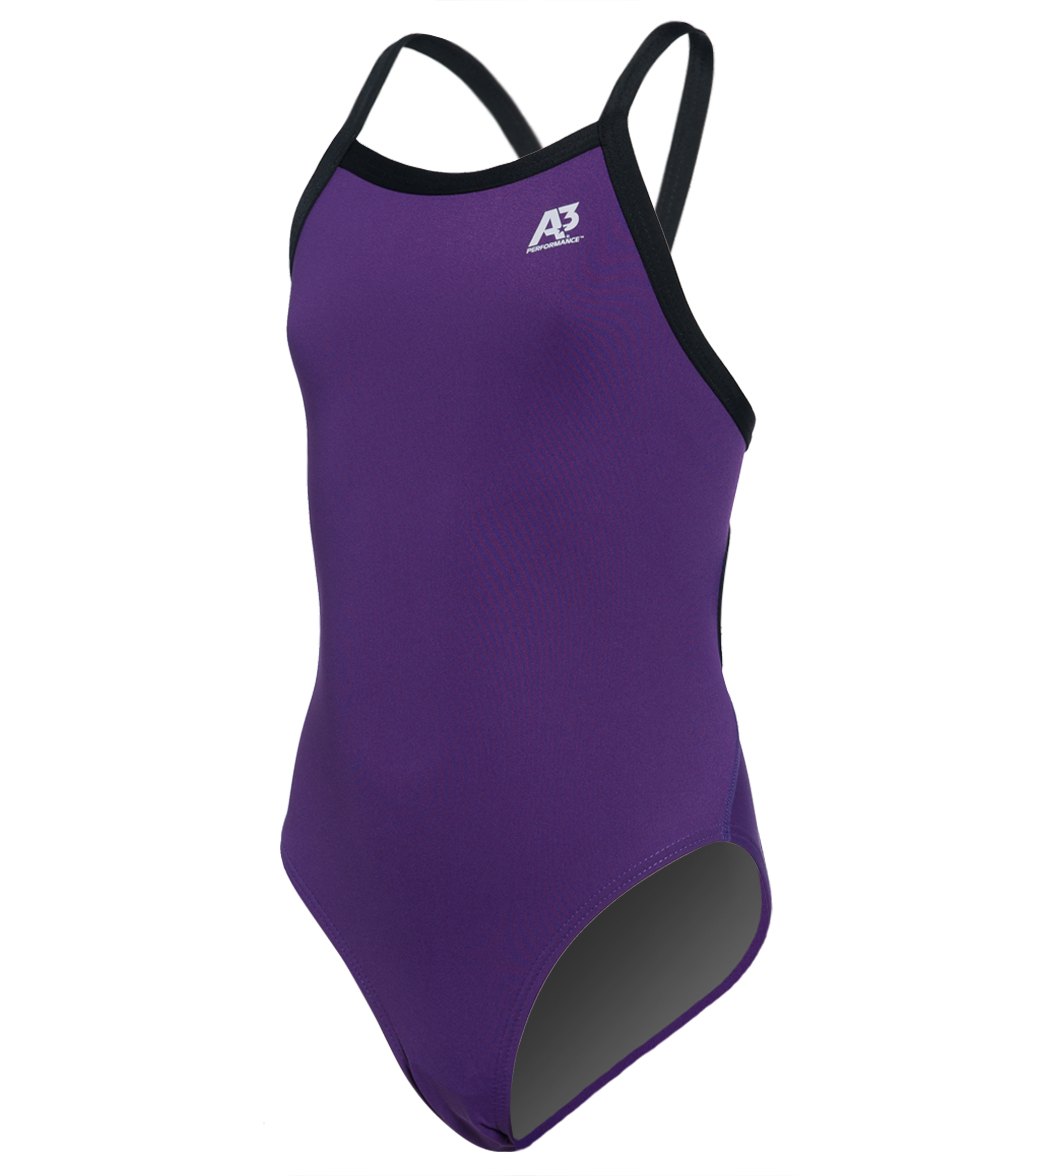 A3 Performance Female Youth X-Back Poly Swimsuit W/ Contrast Trim - Purple/Black 22 Polyester/Pbt - Swimoutlet.com